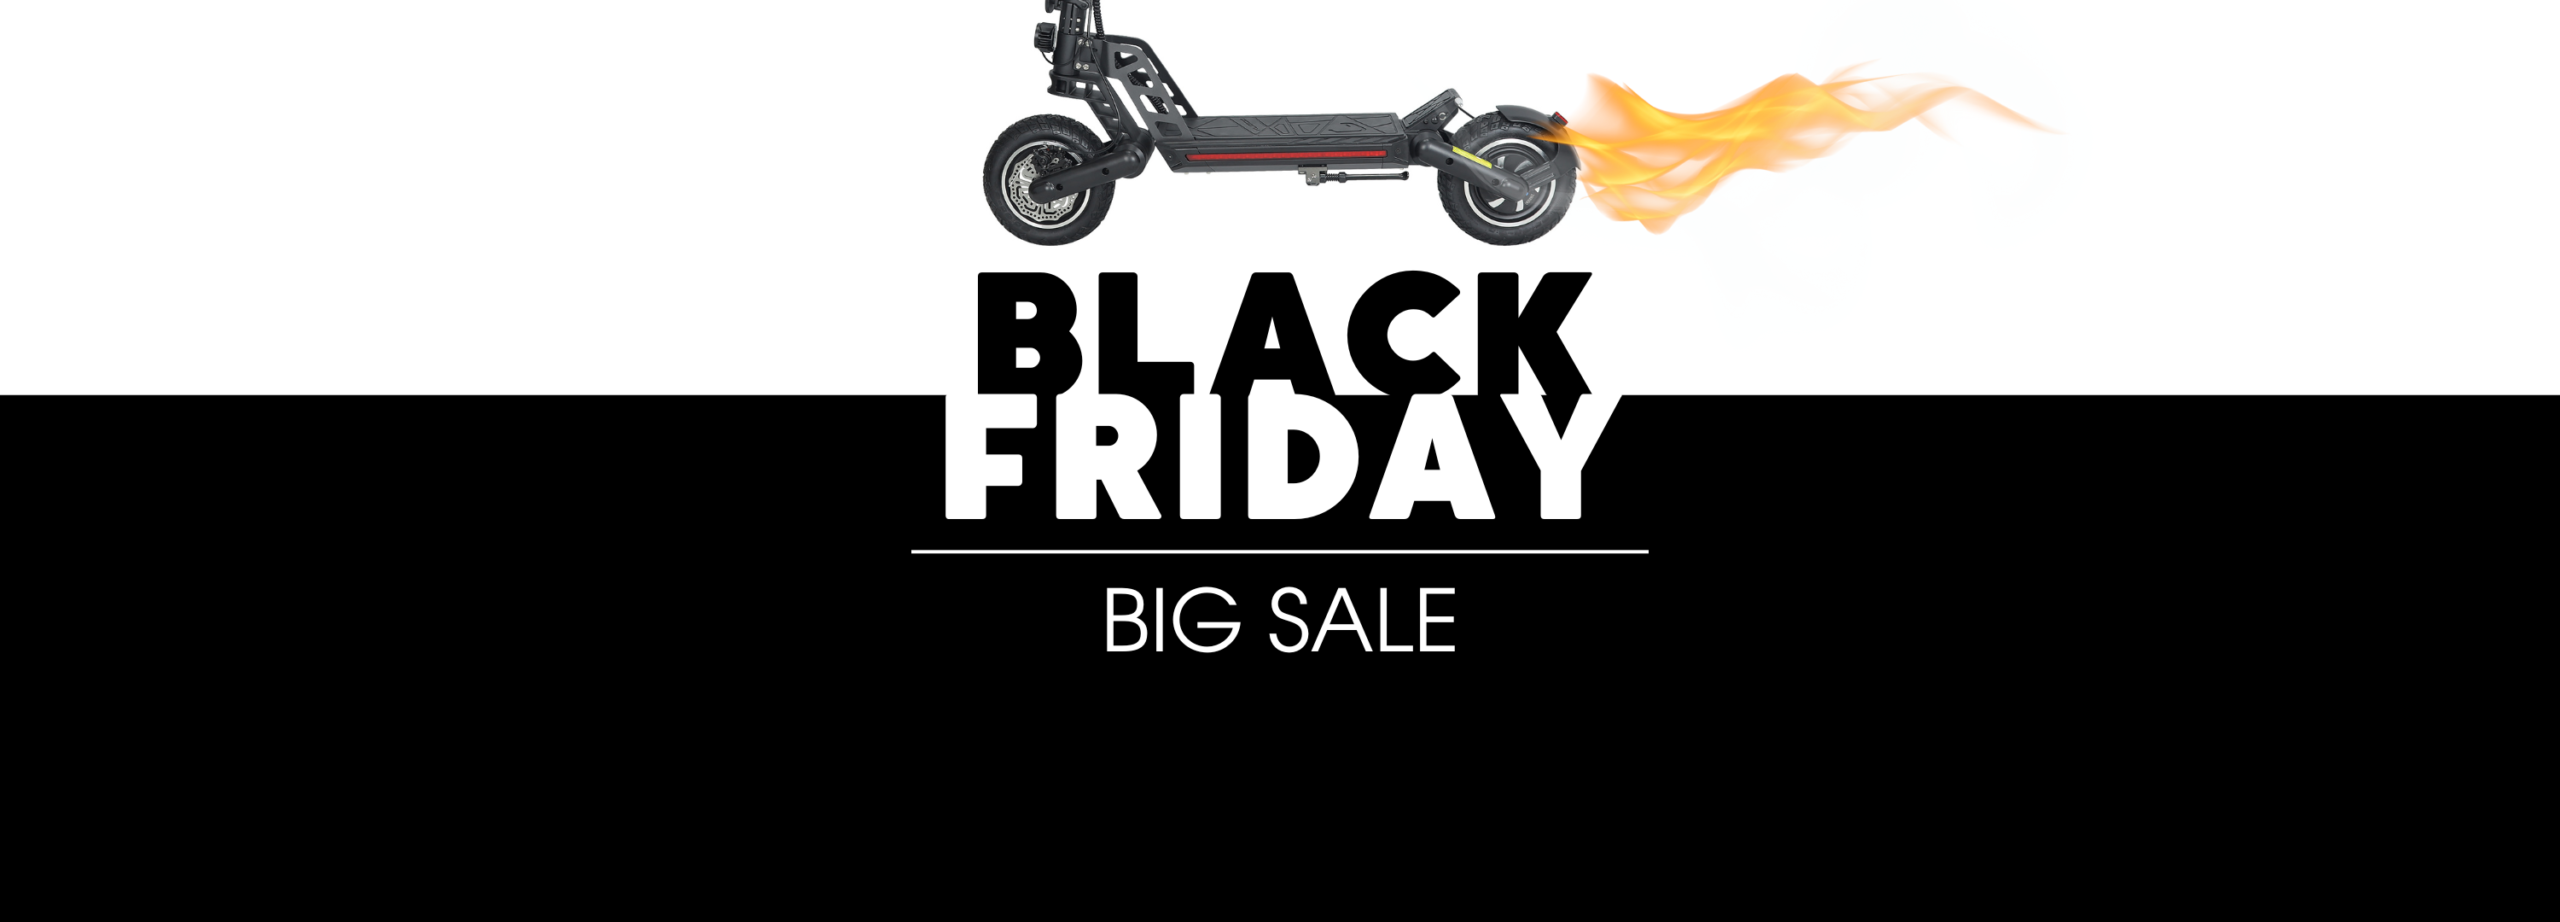 Black Friday Electric Scooter